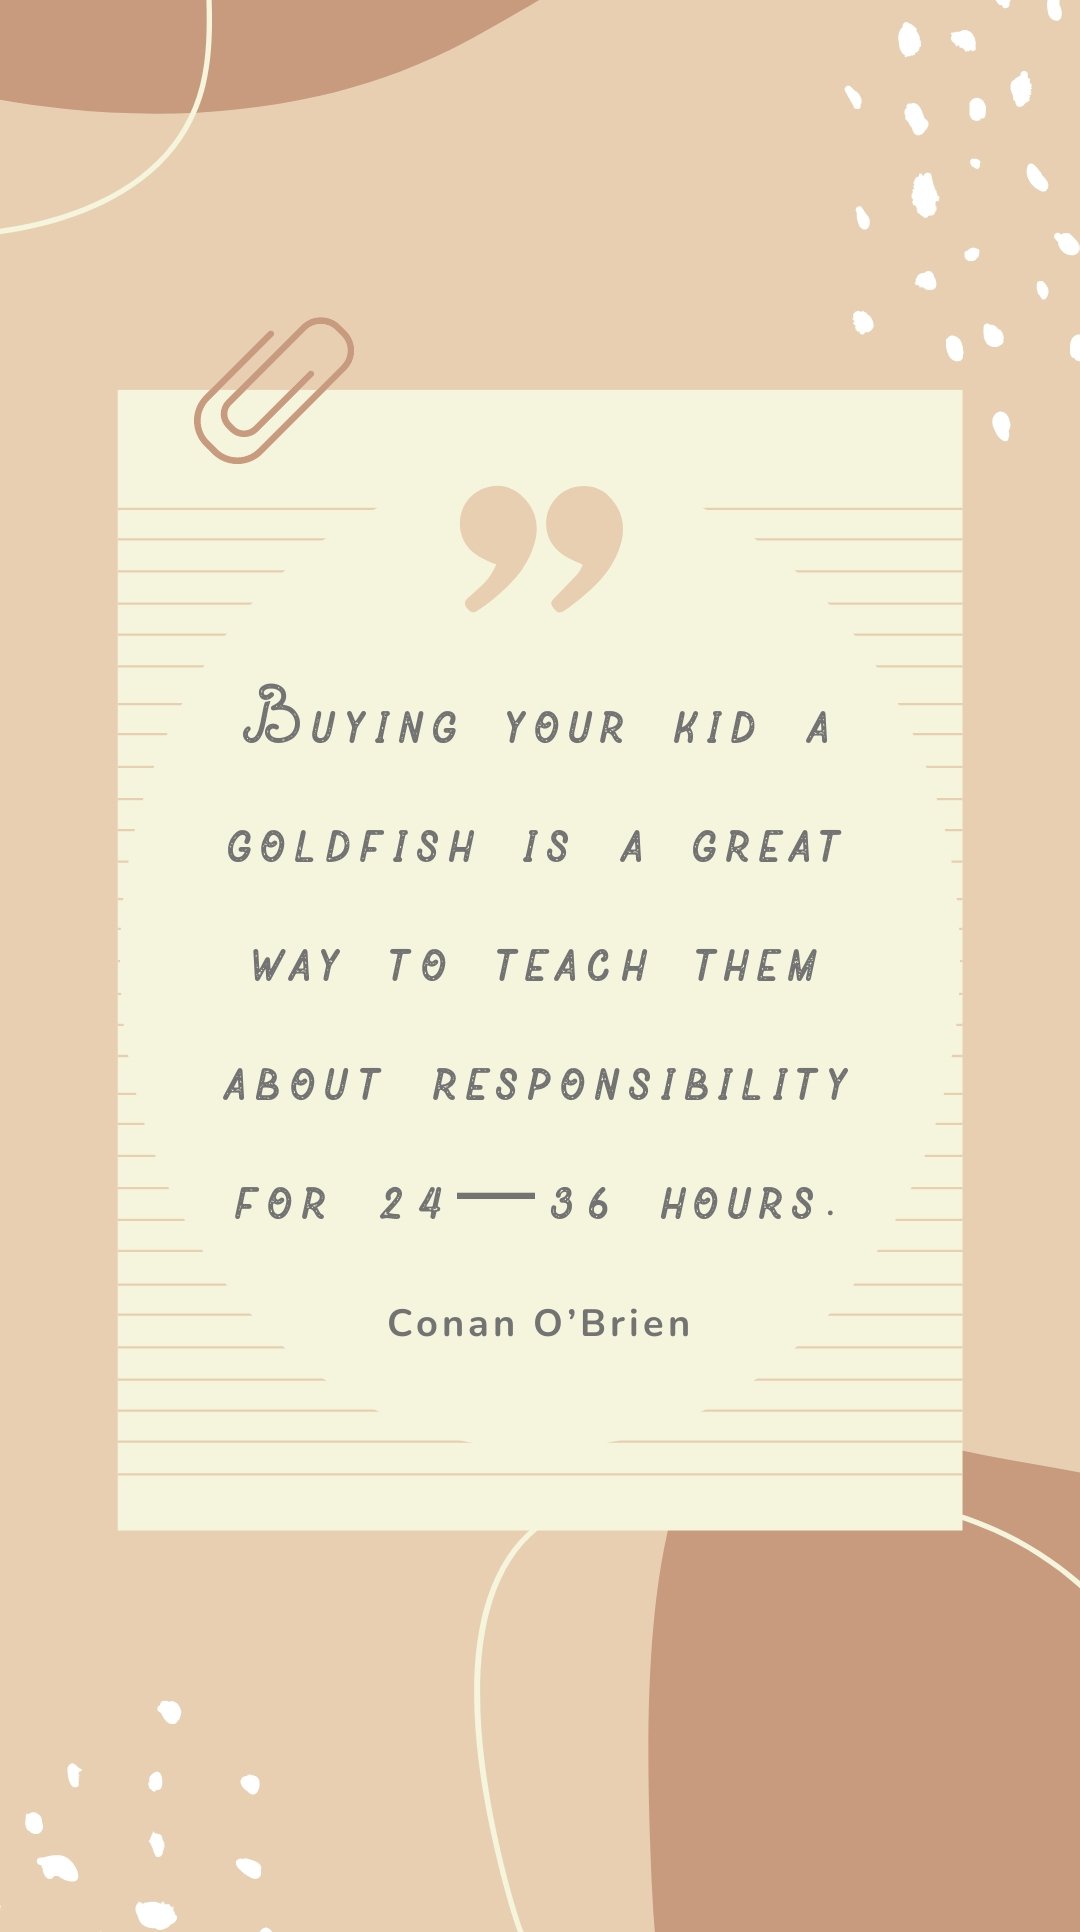 Free Conan O’Brien - Buying your kid a goldfish is a great way to teach them about responsibility for 24—36 hours. in JPG